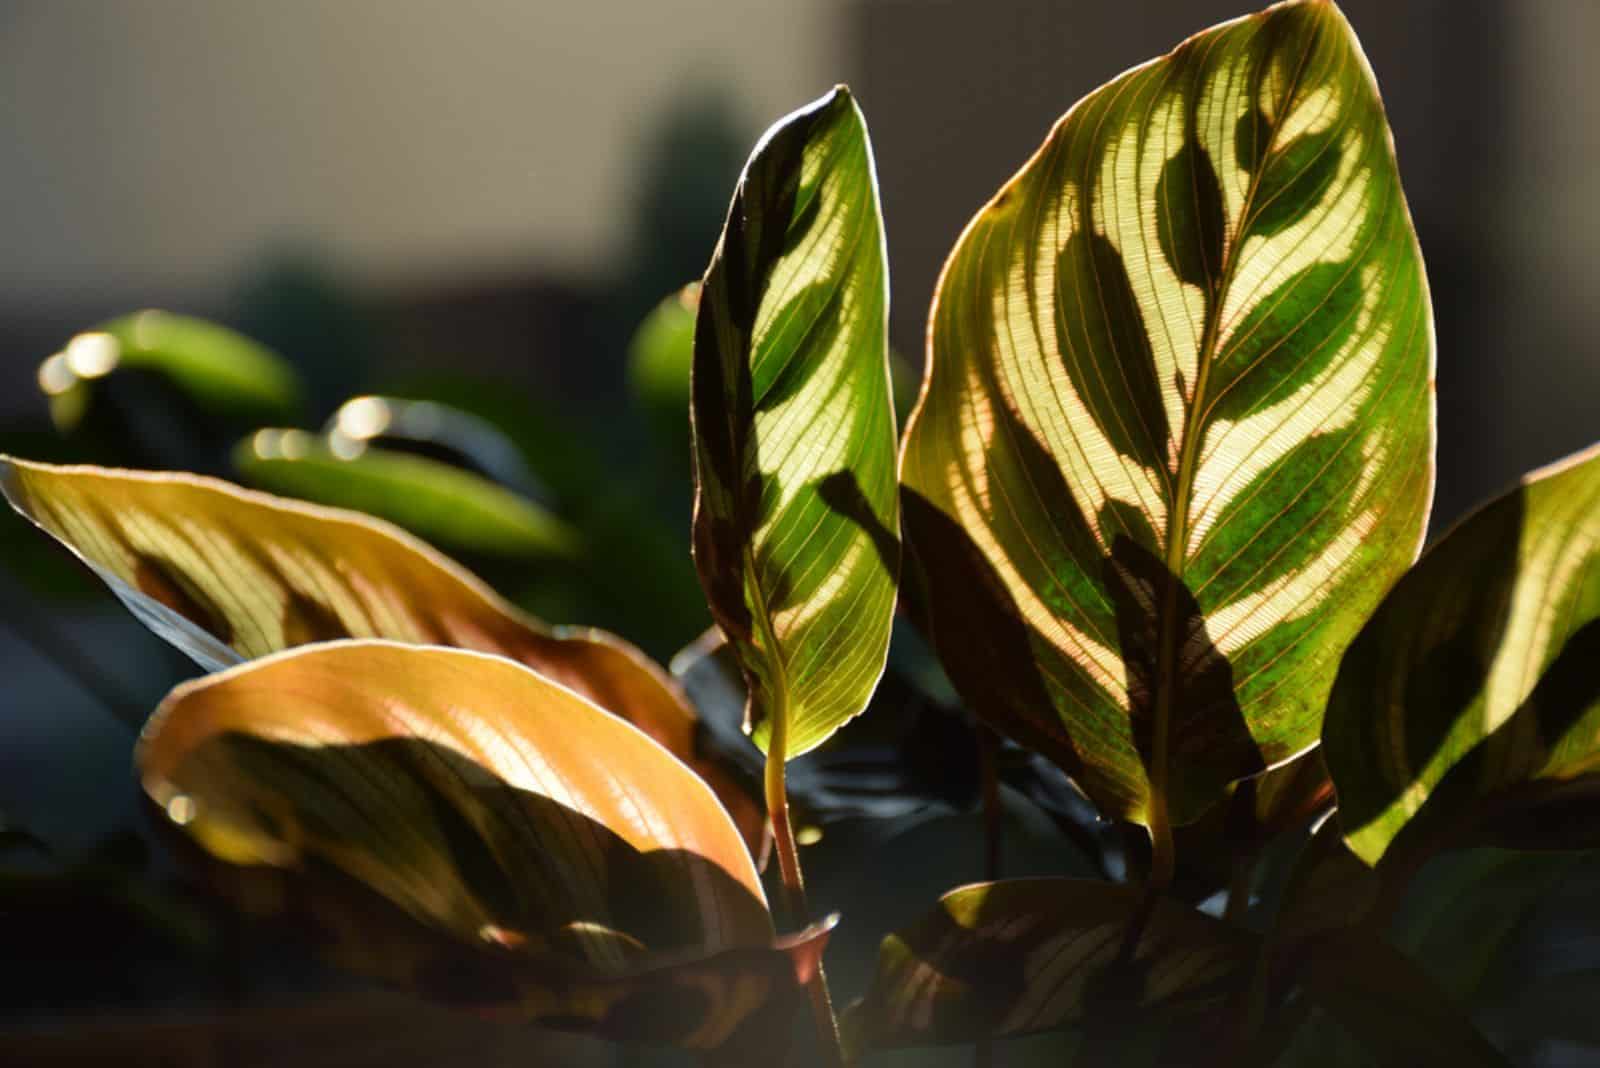 Prayer Plant At Night: Do These Plants Actually Pray?